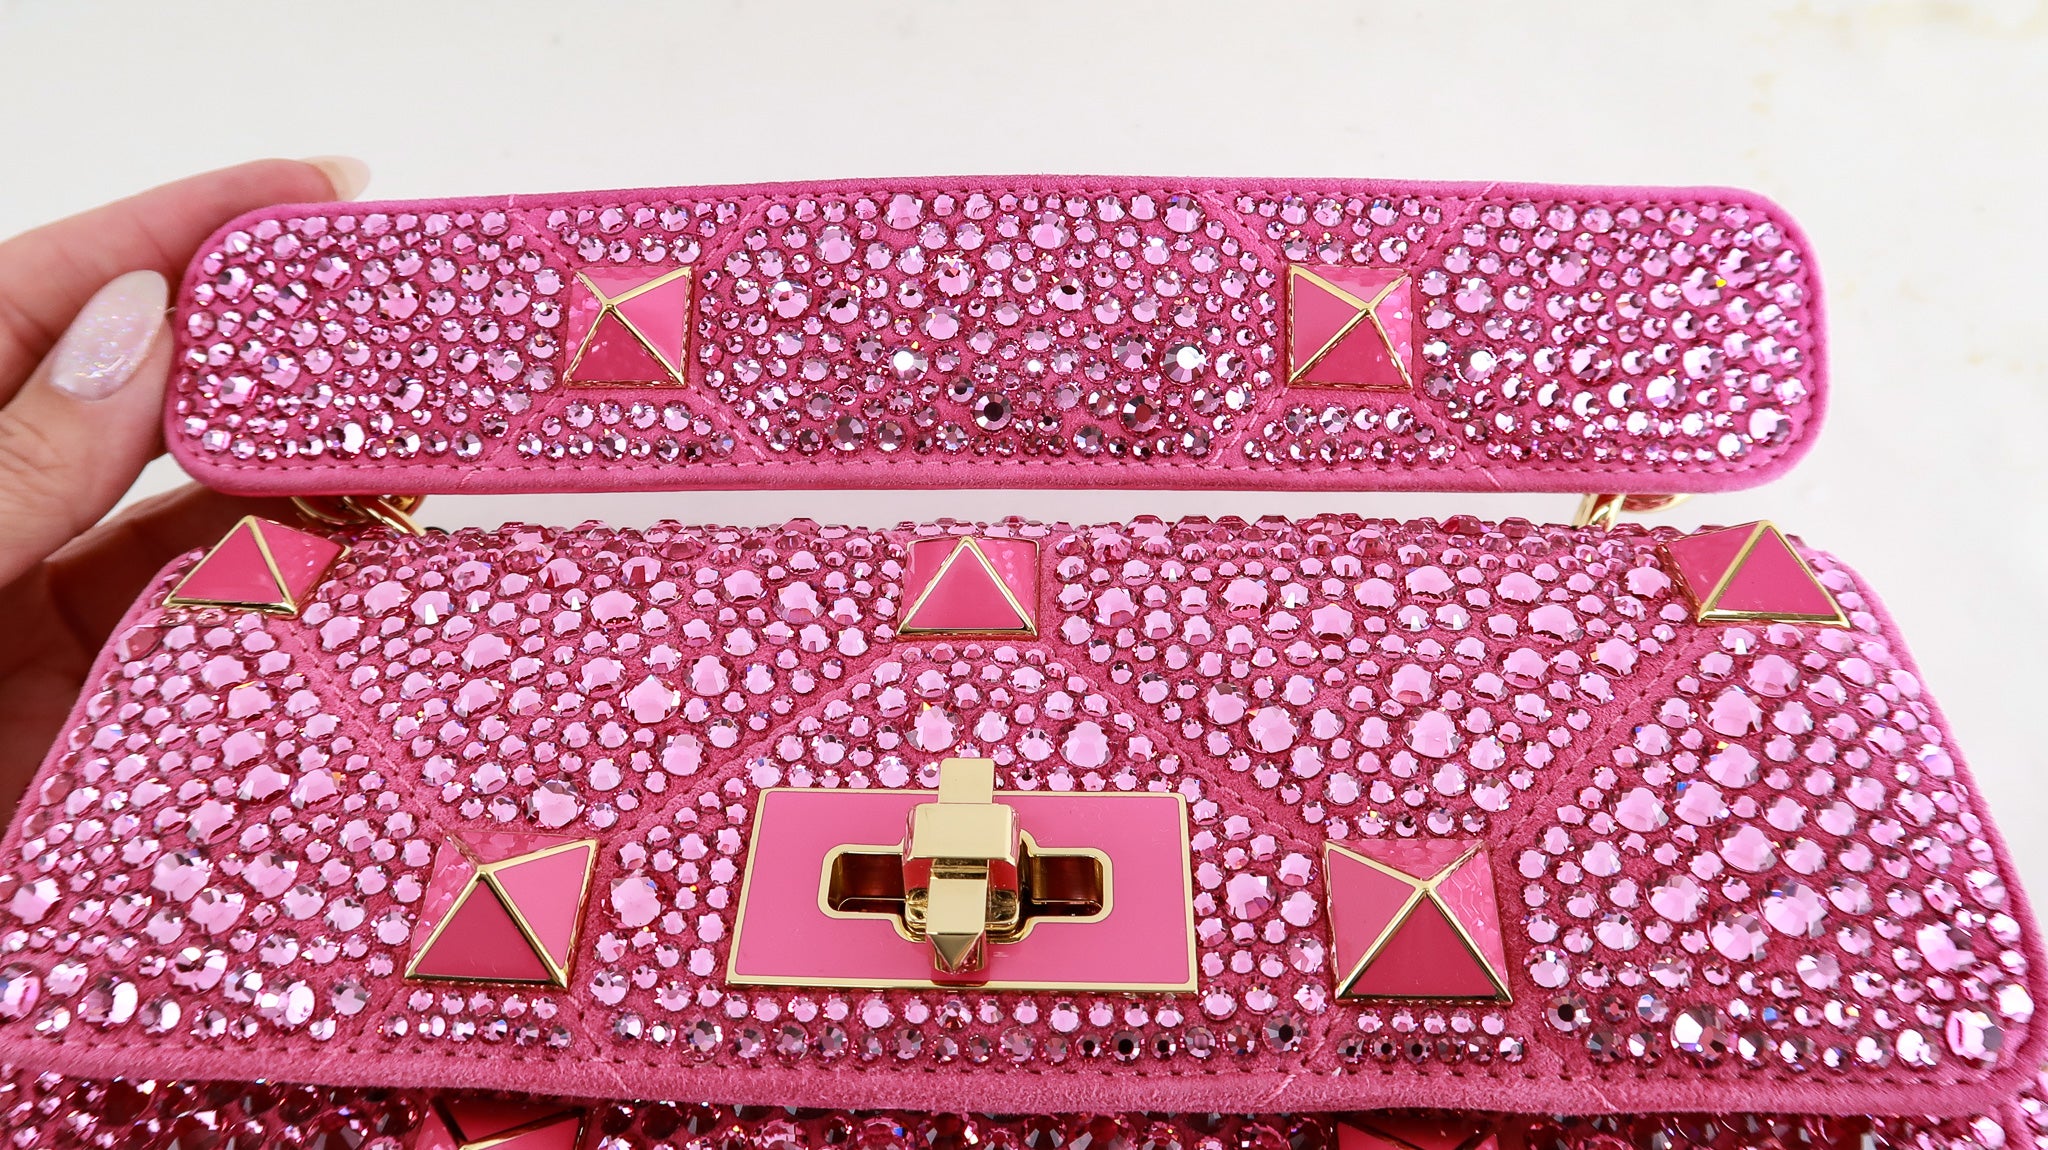 100% Authentic Brand New VALENTINO Pink Crystal Shoulder Bag Rare Retail  $4275